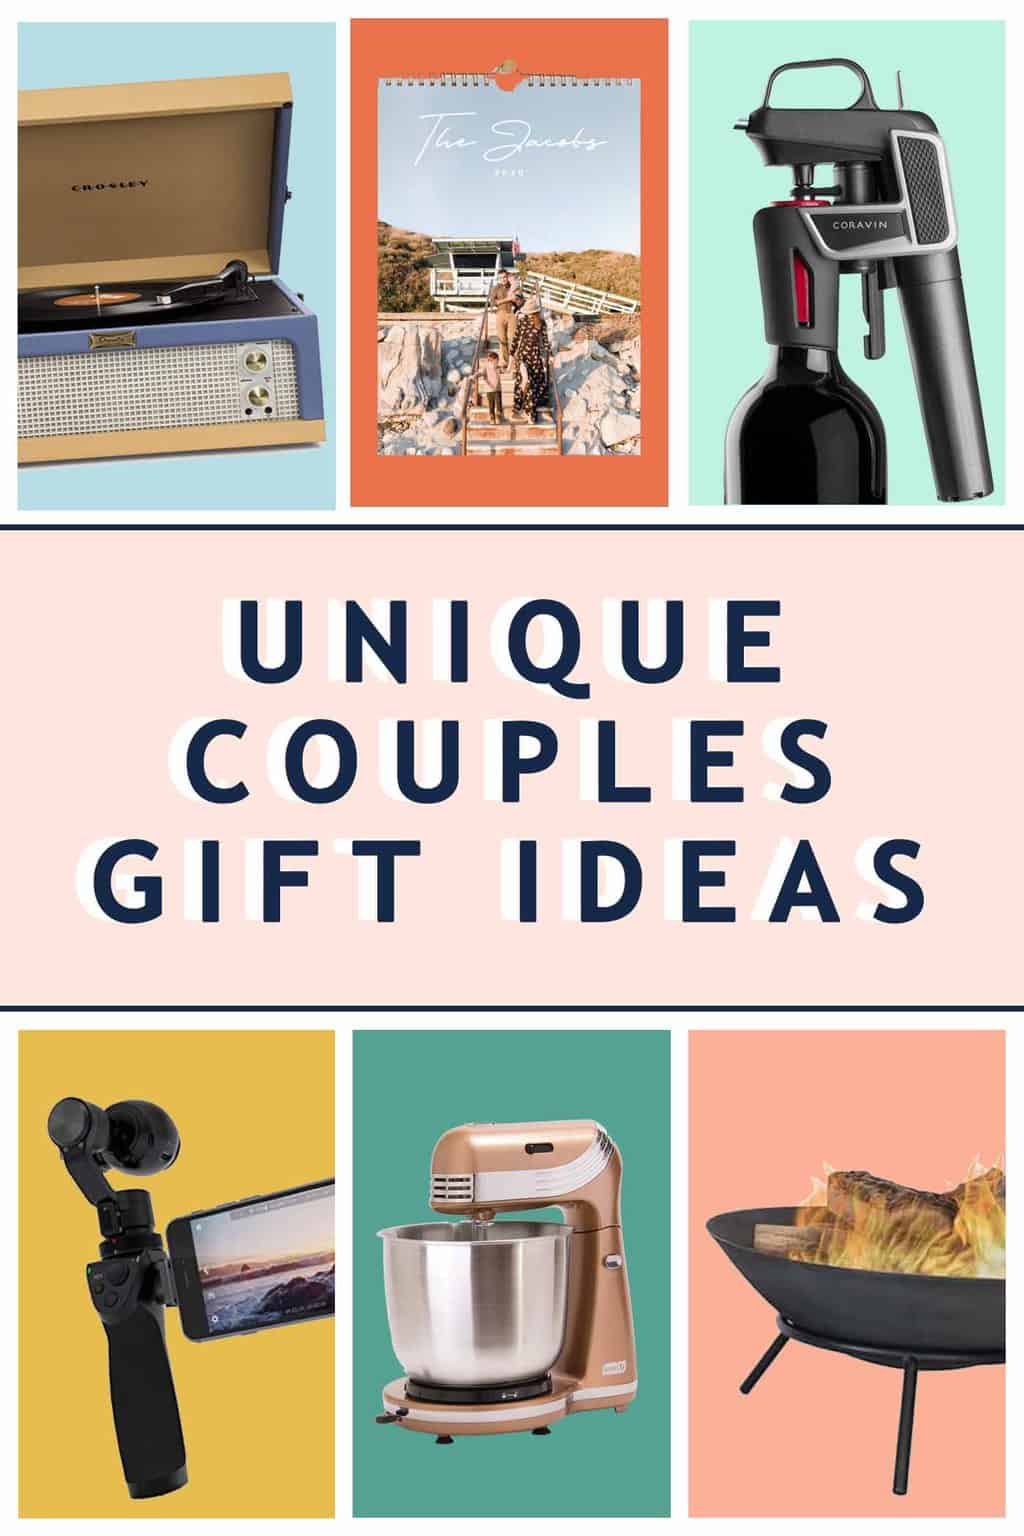 25 Amazing Gift Ideas That Cost Next to Nothing